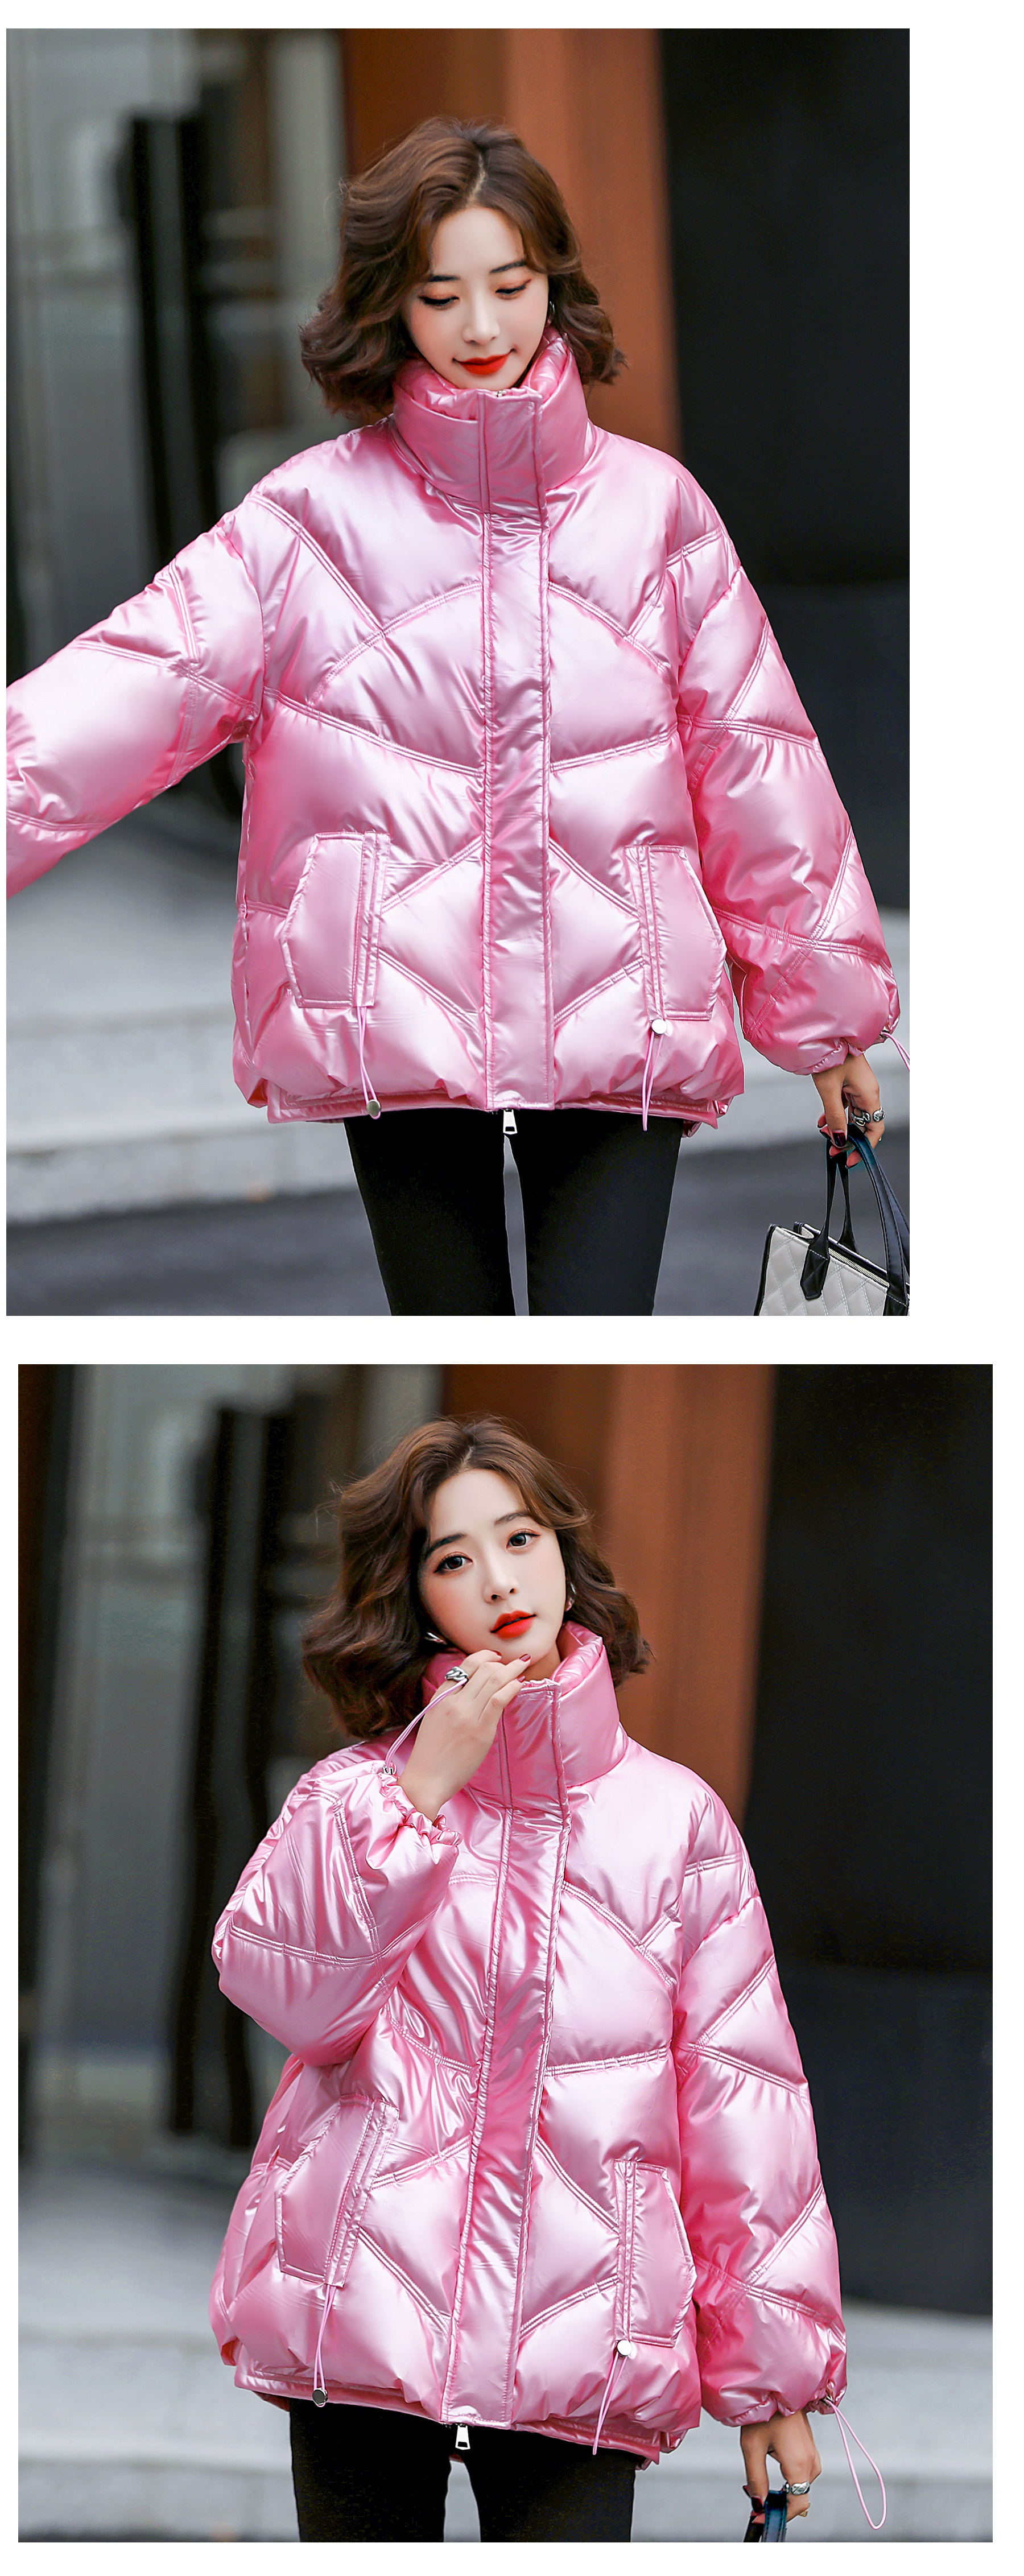 Women's Cropped Puffer Jacket Fashion Winter Outfit Coat19